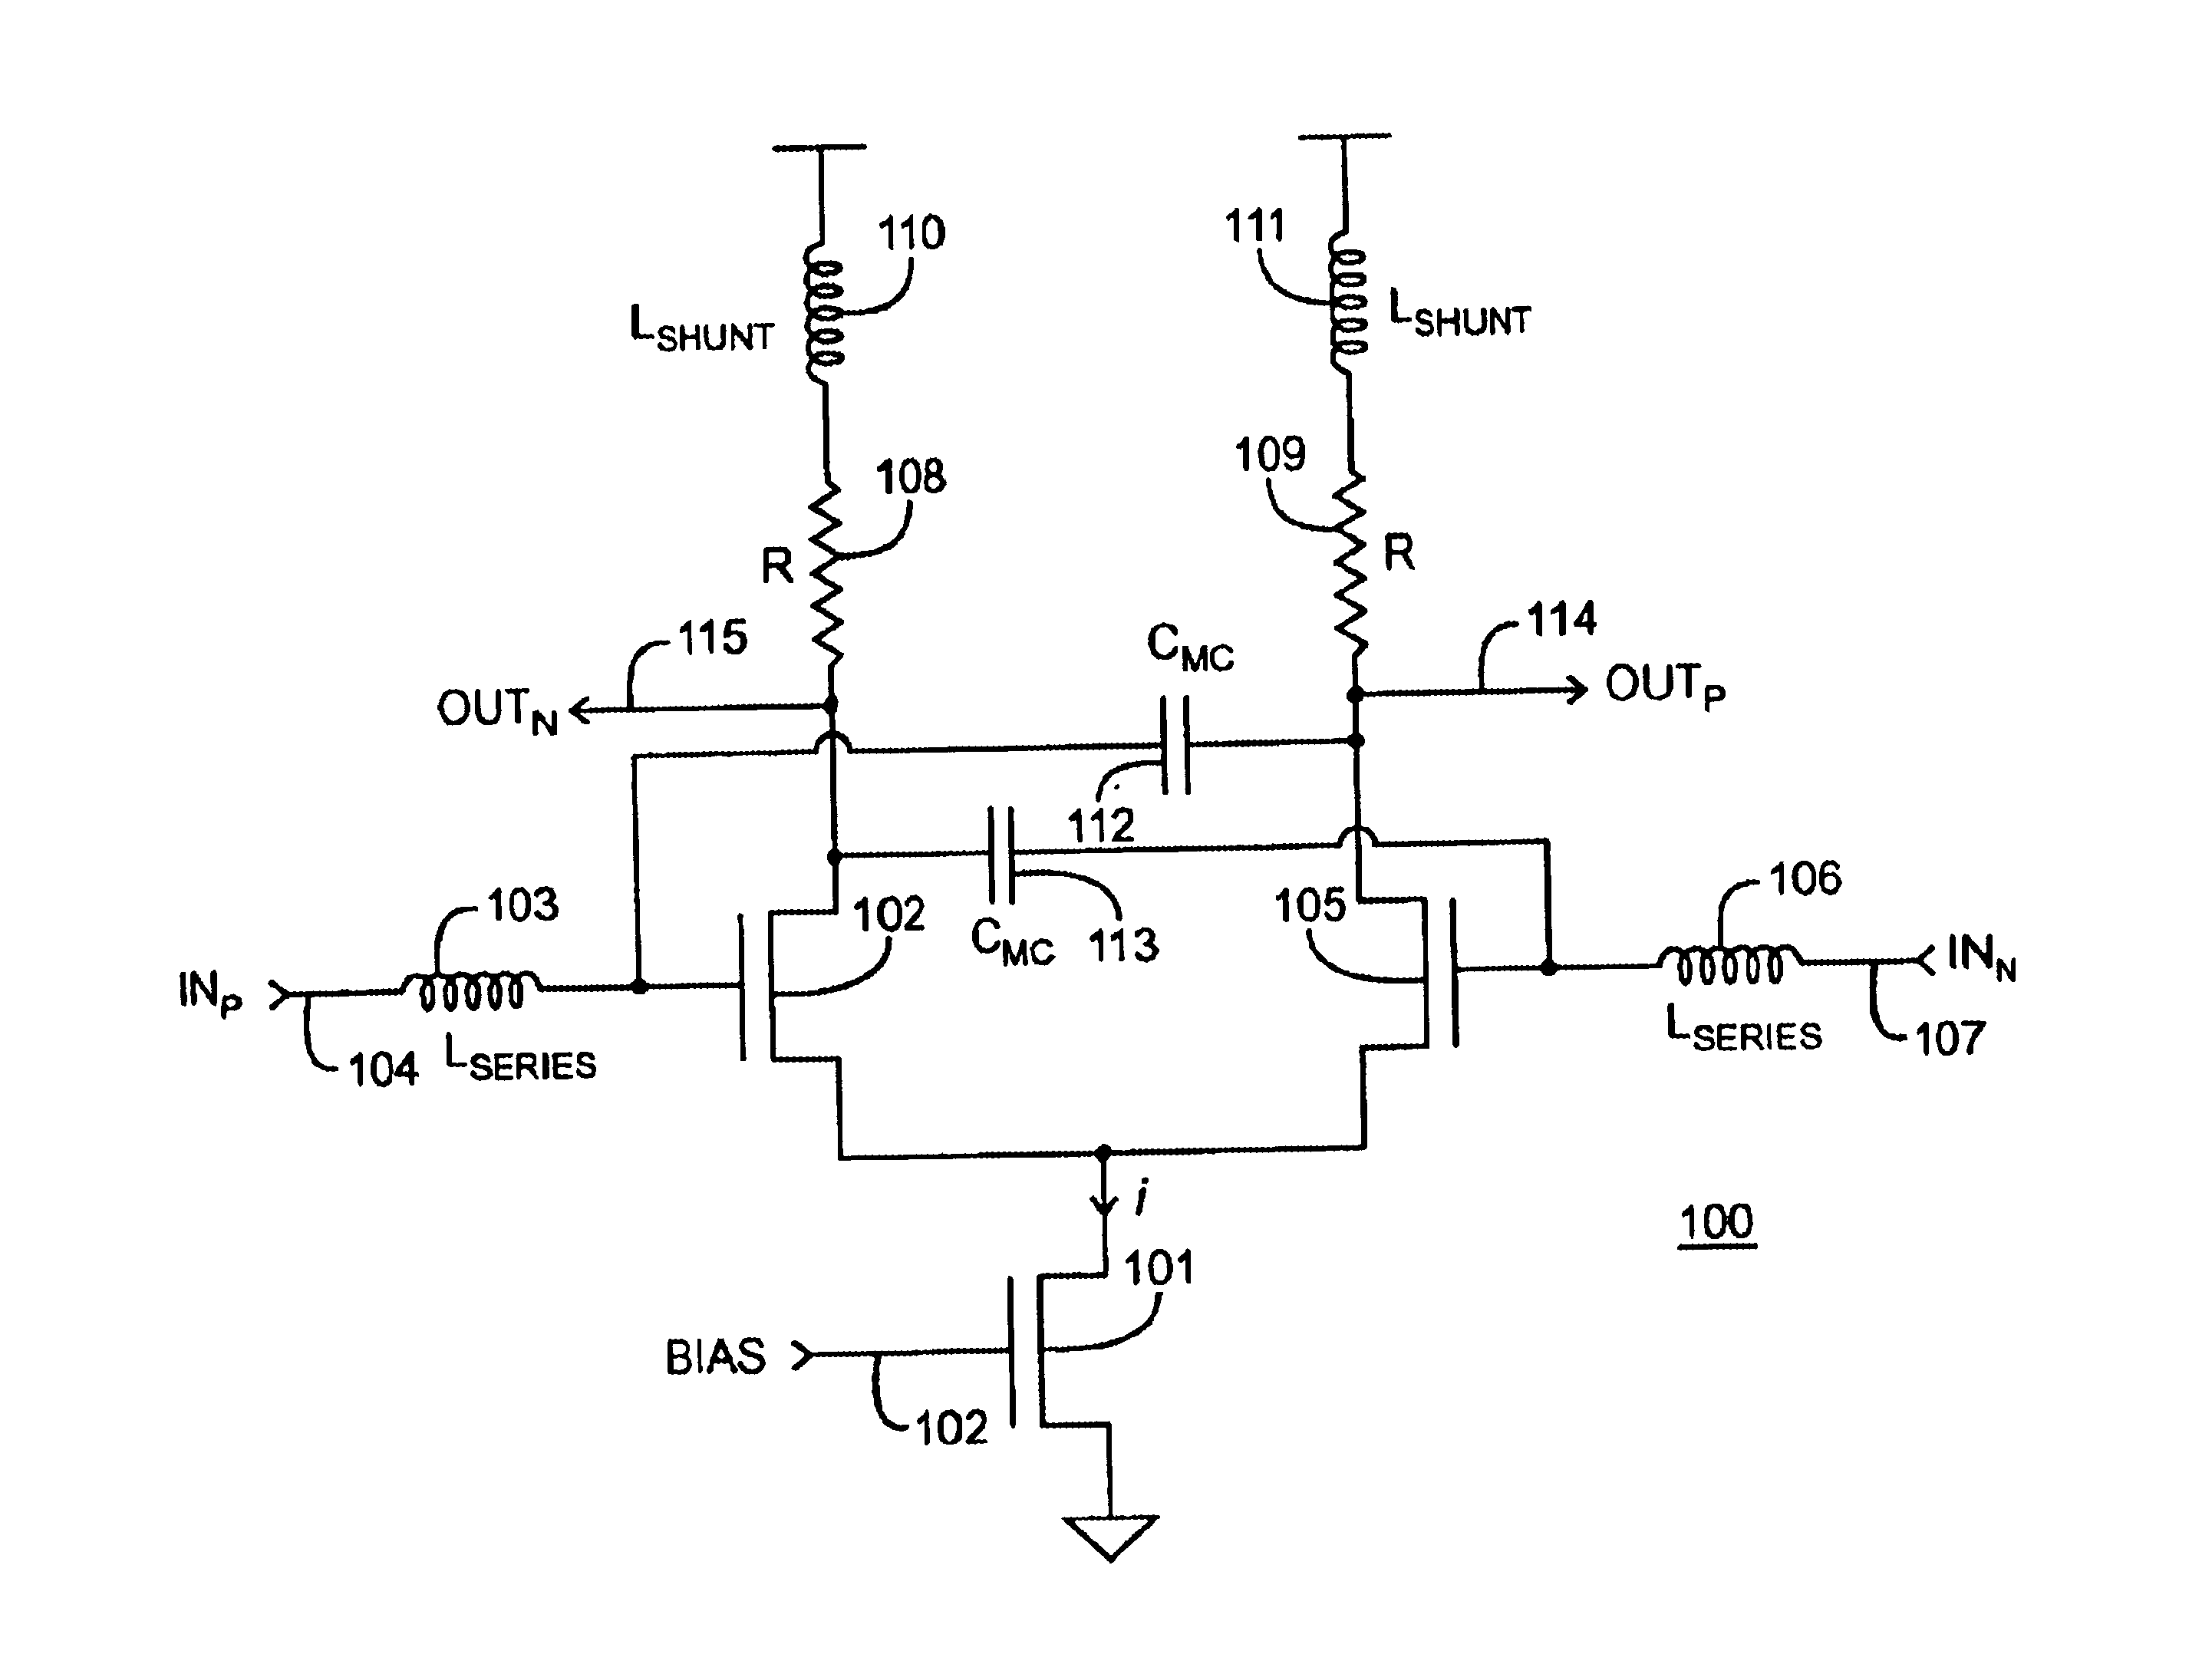 Current-controlled CMOS wideband data amplifier circuits